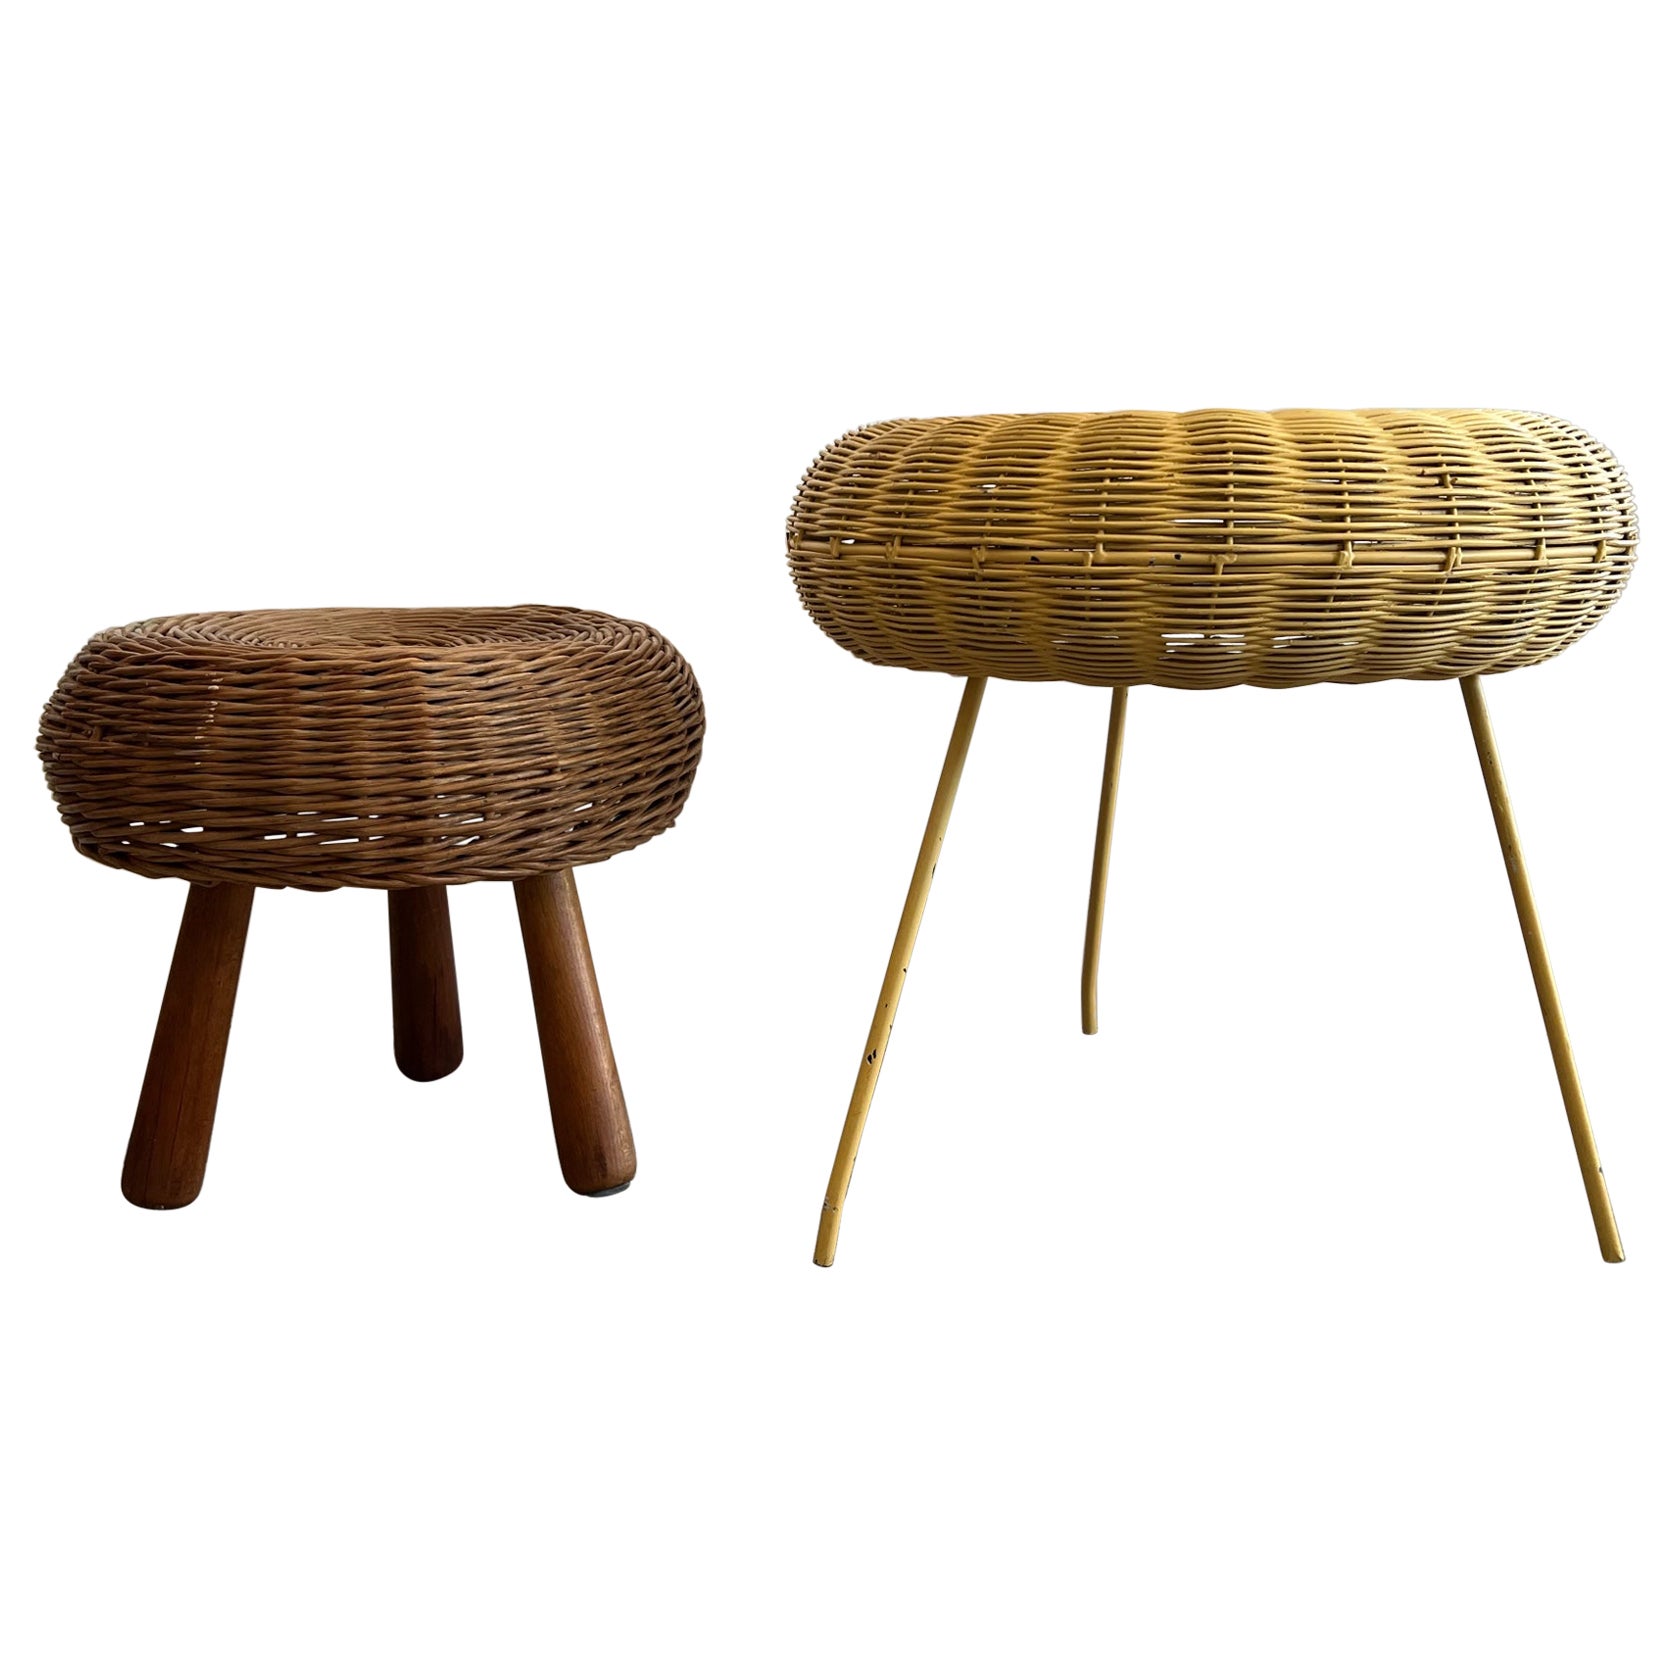 Two Vintage Wicker Stools For Sale